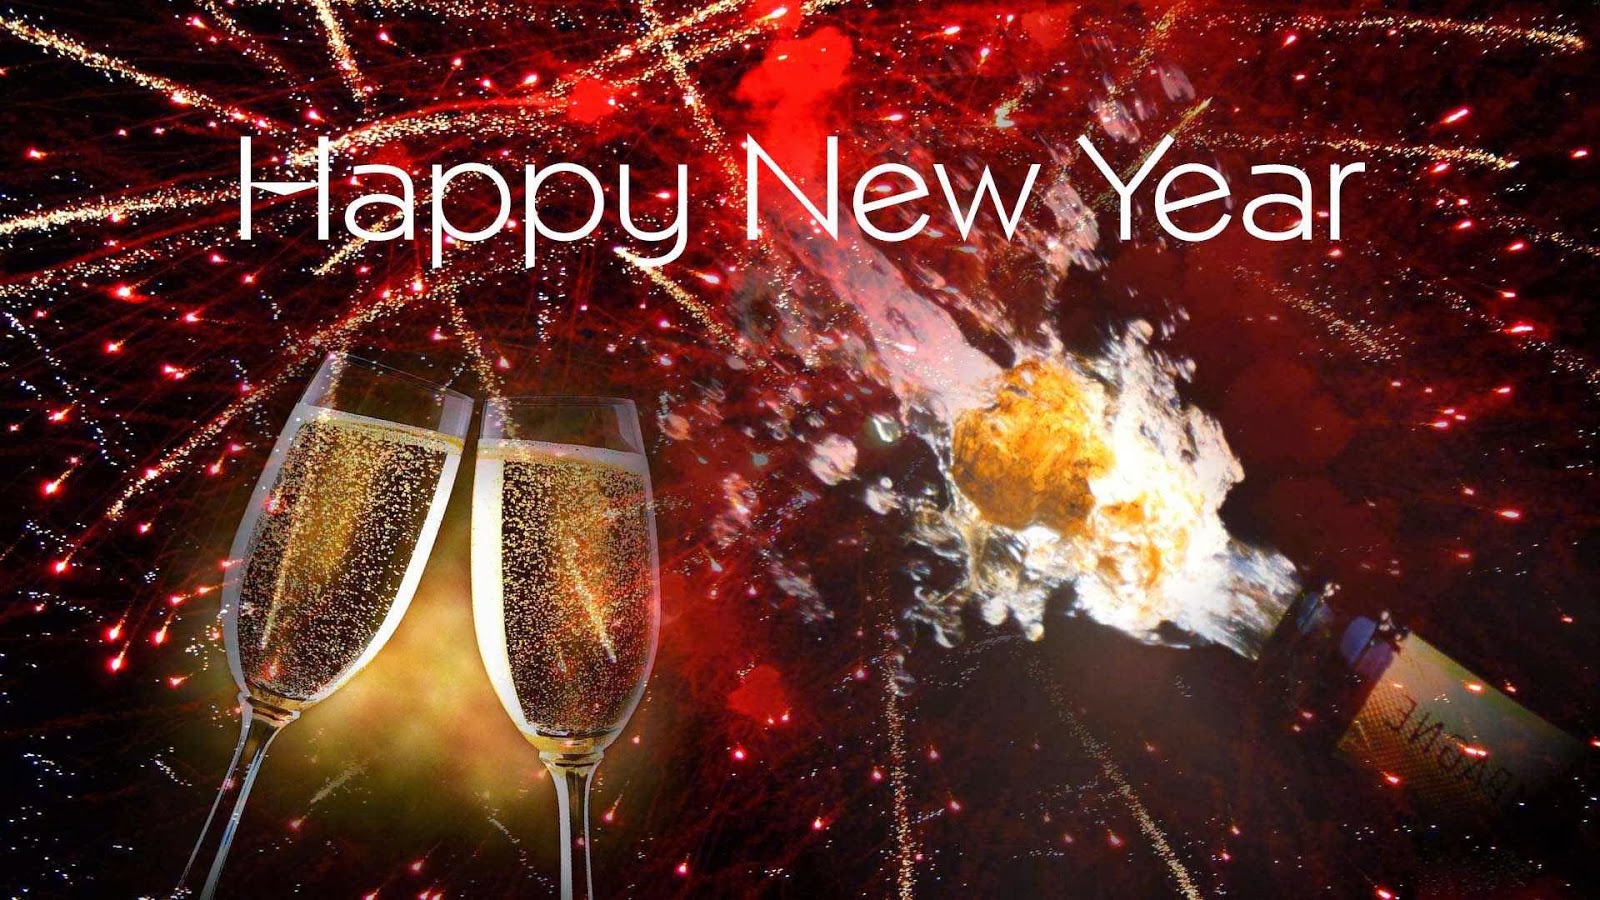 ... new year wallpapers download and full hd happy new year wallpapers